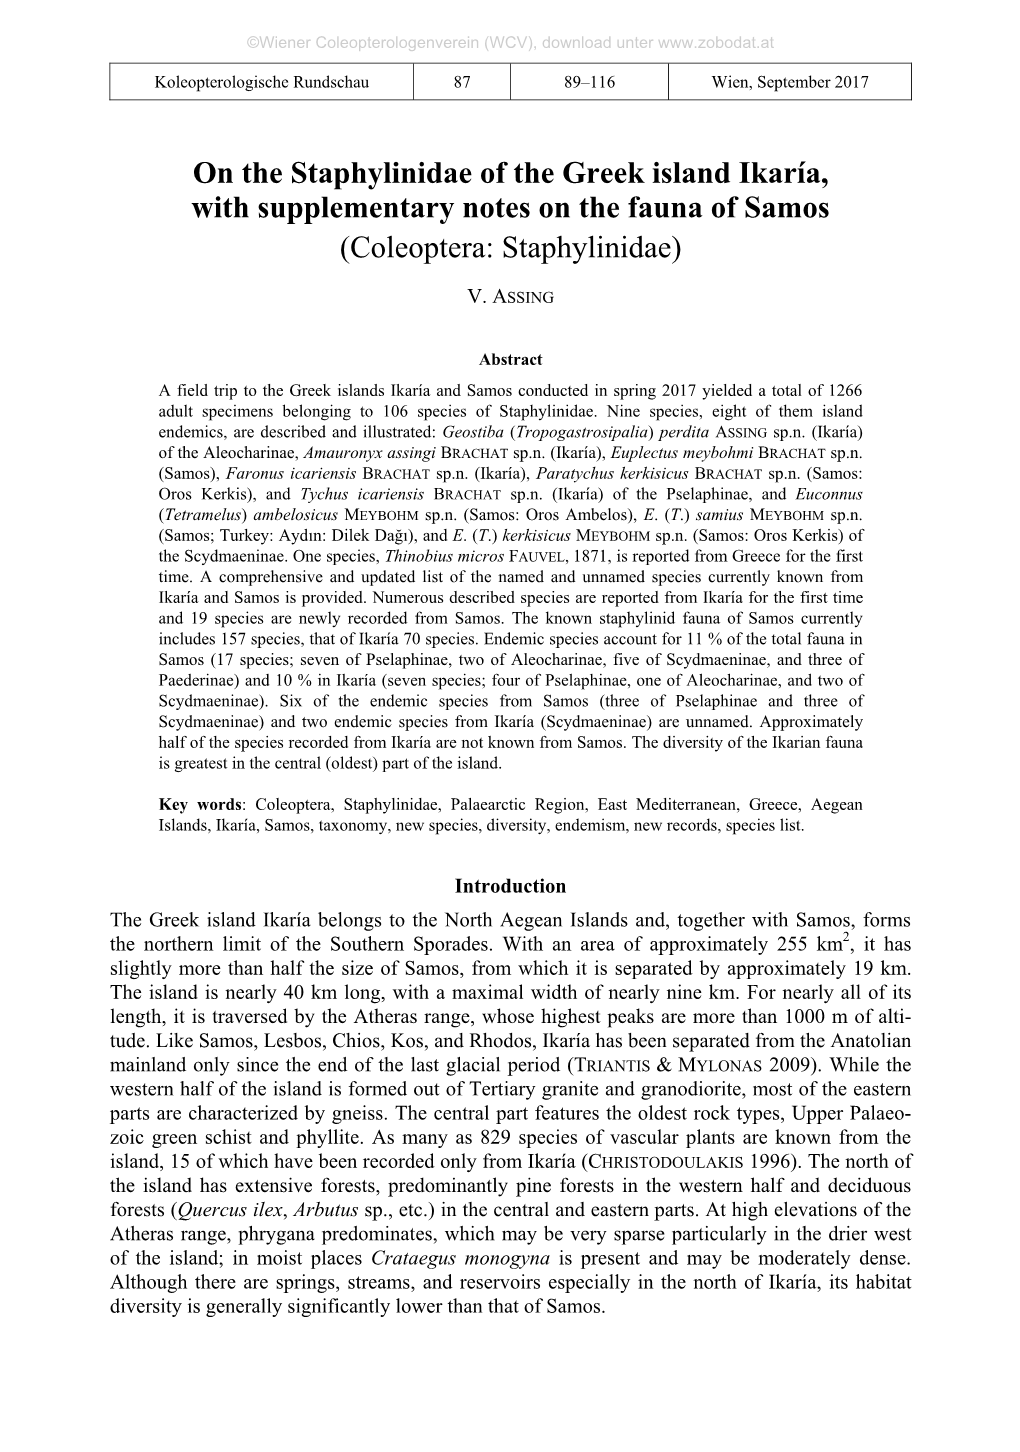 On the Staphylinidae of the Greek Island Ikaría, with Supplementary